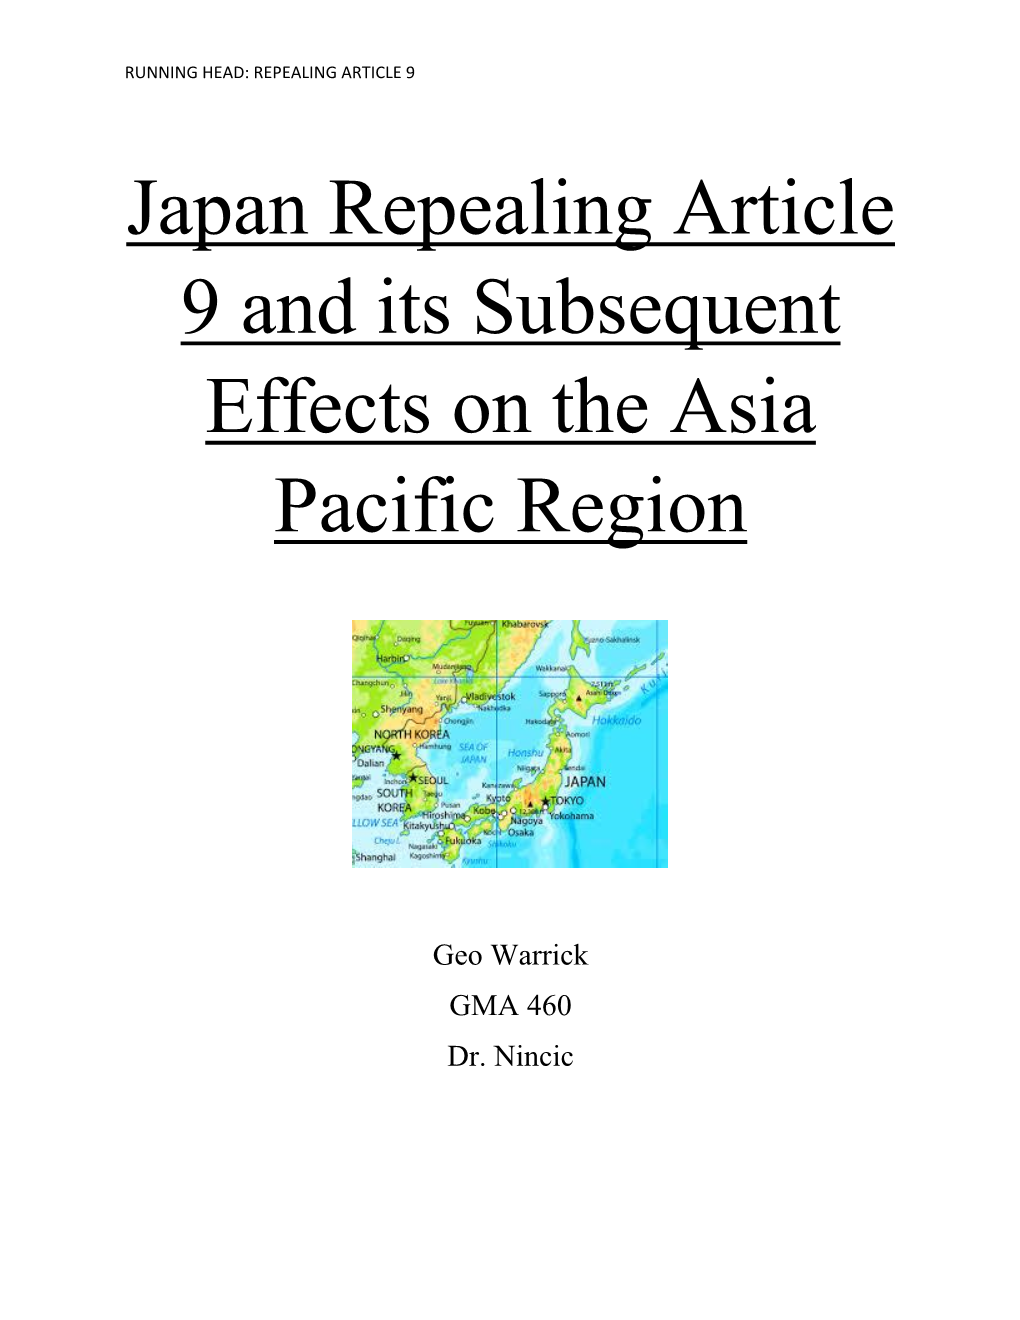 Japan Repealing Article 9 and Its Subsequent Effects on the Asia Pacific Region